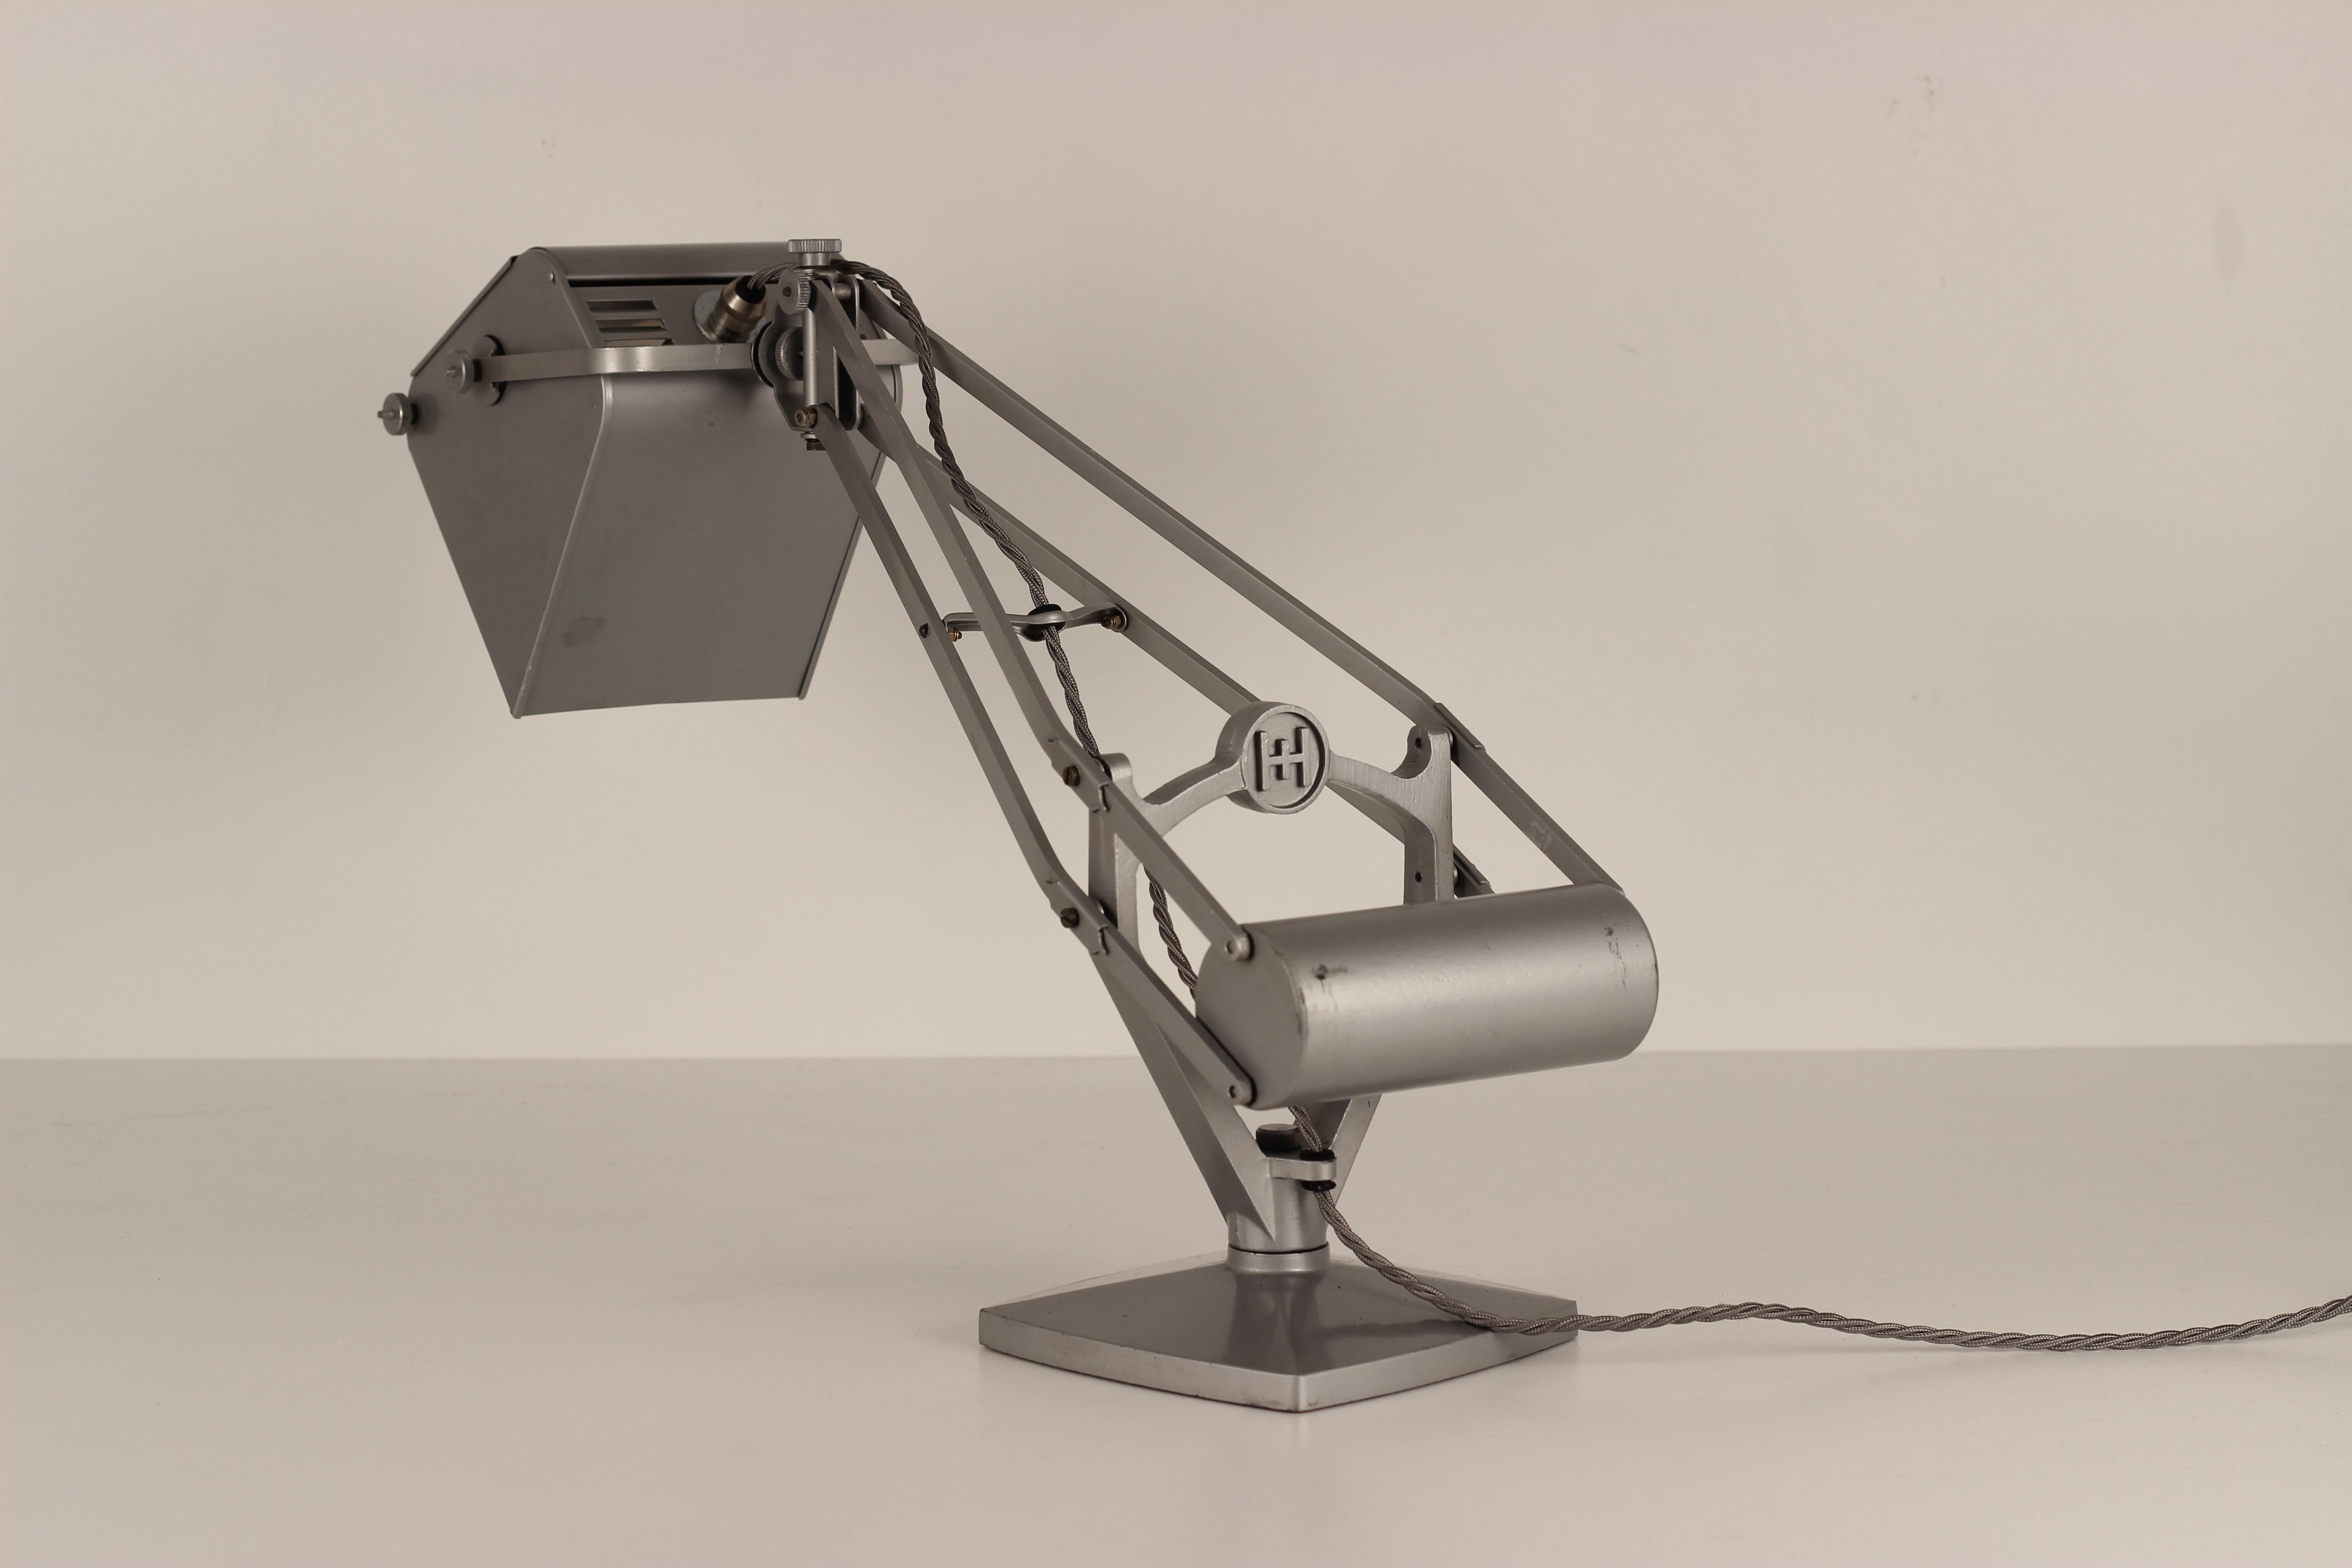 Mid-20th Century Horstmann Magnifying Glass Anglepoise Work Lamp Made in the 1930’s